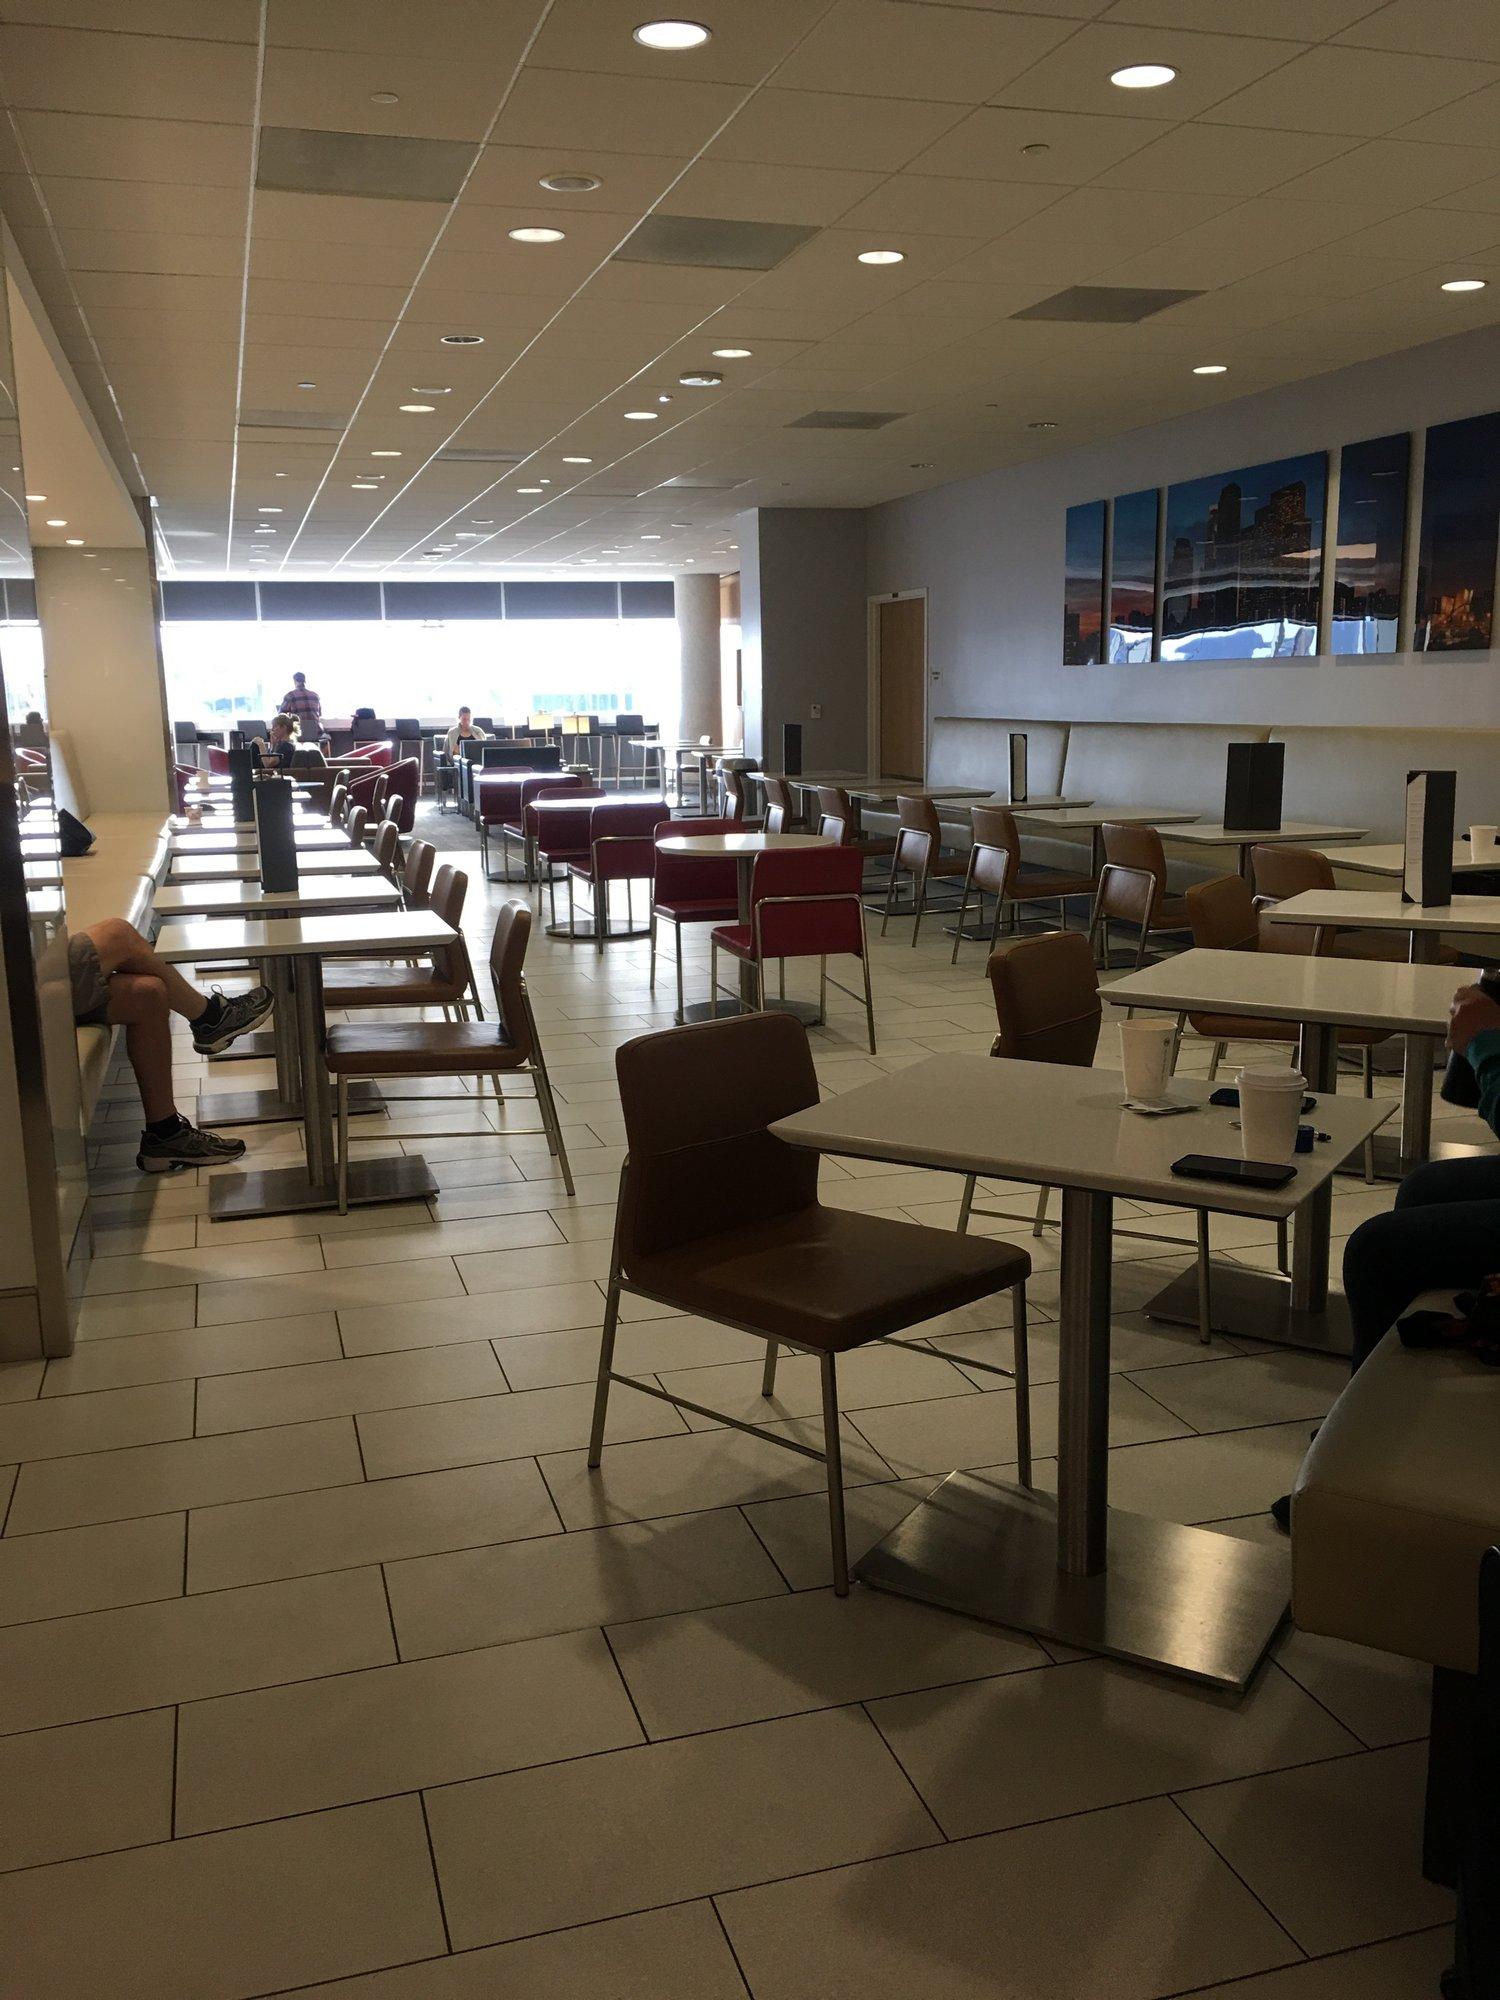 American Airlines Admirals Club image 24 of 38